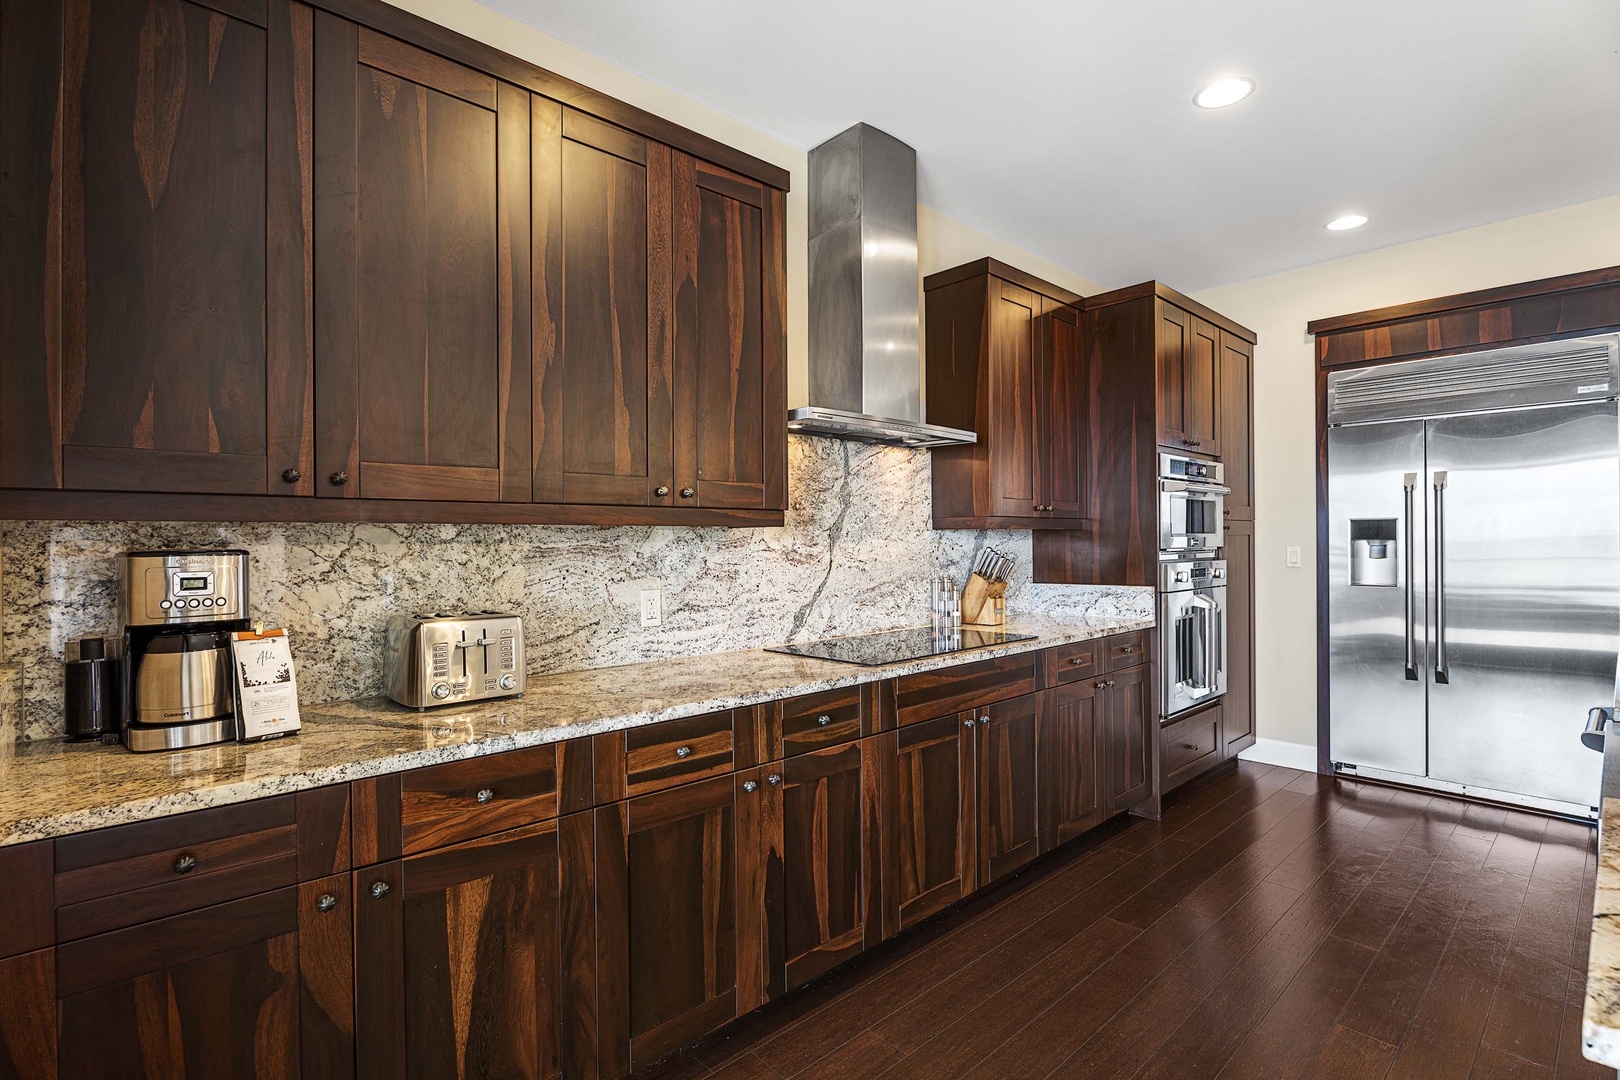 Kailua Kona Vacation Rentals, Holua Kai #20 - Spacious kitchen for many to join in for meal preparation